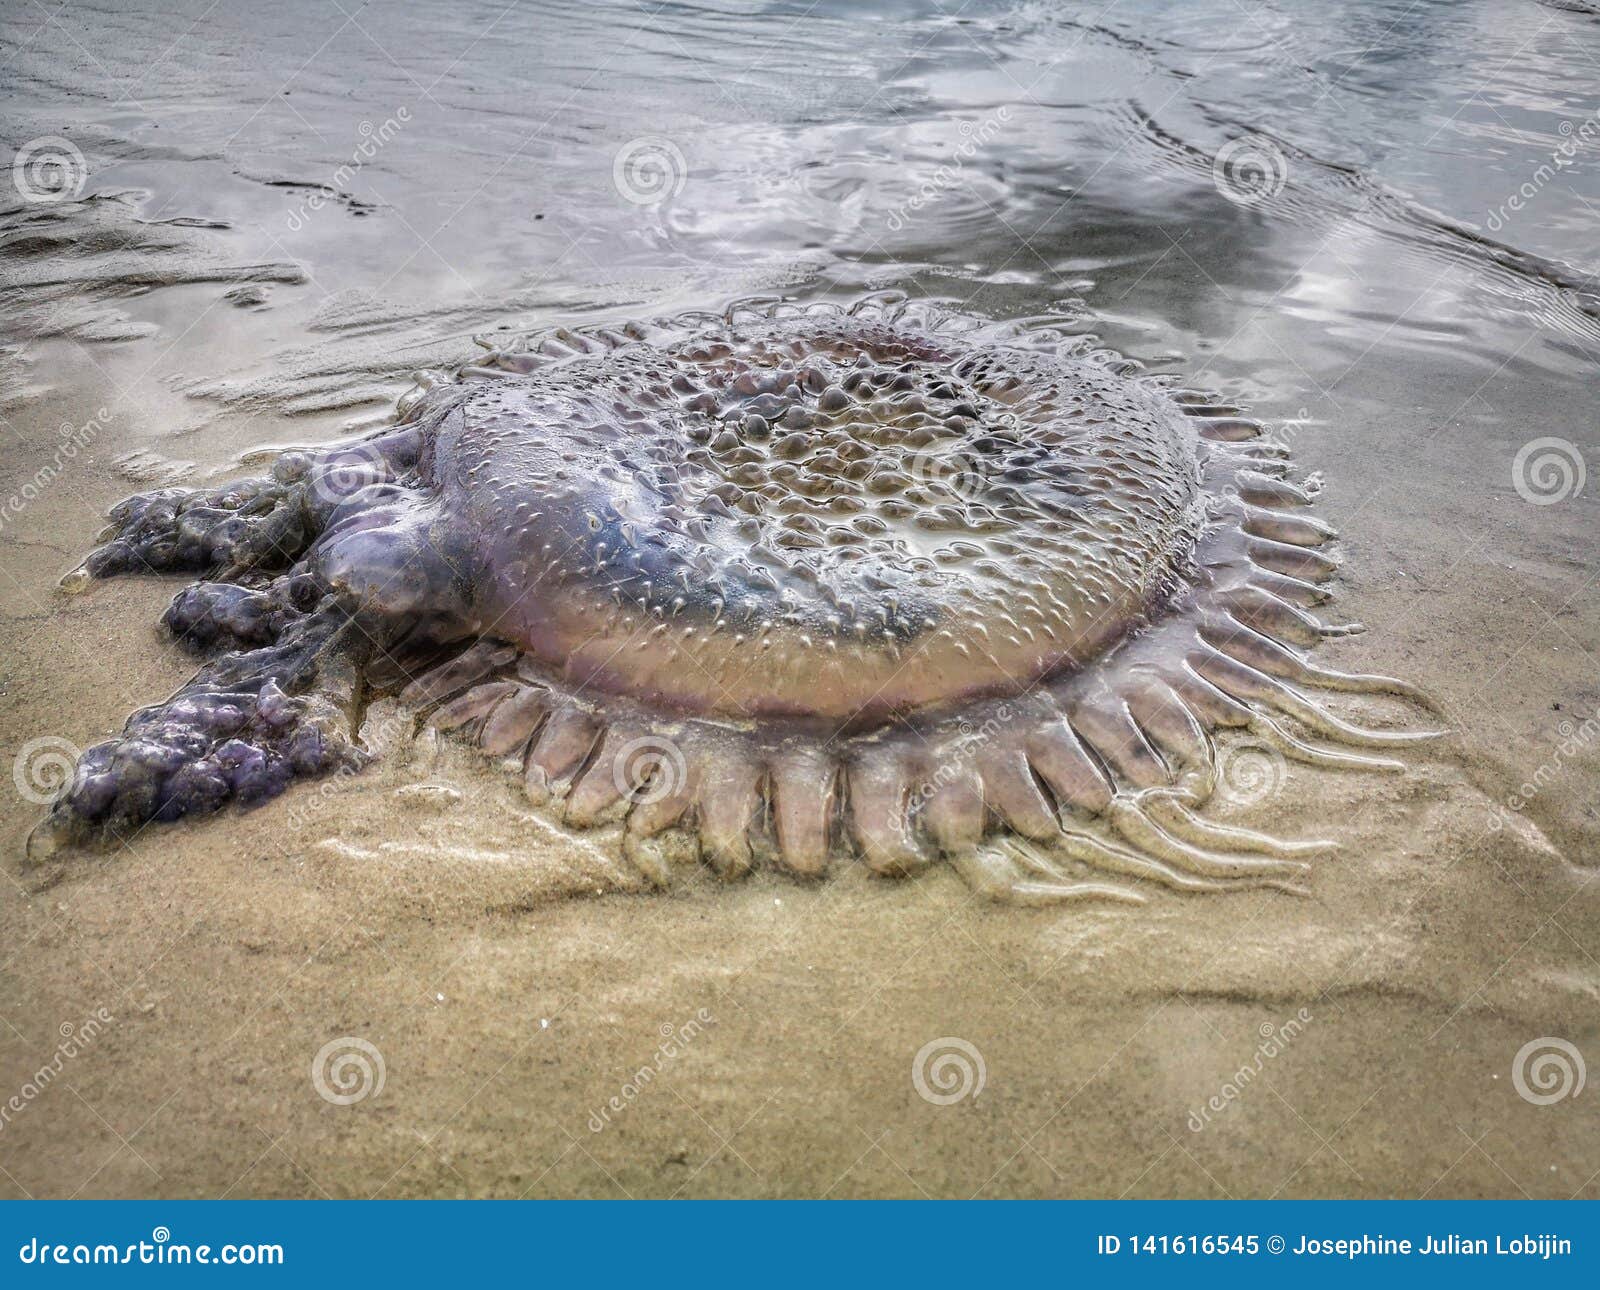 Jellyfish Wash Up On The Beach Dead During The Low Tide On The Sea Shore Stock Image Image Of Sand Summer